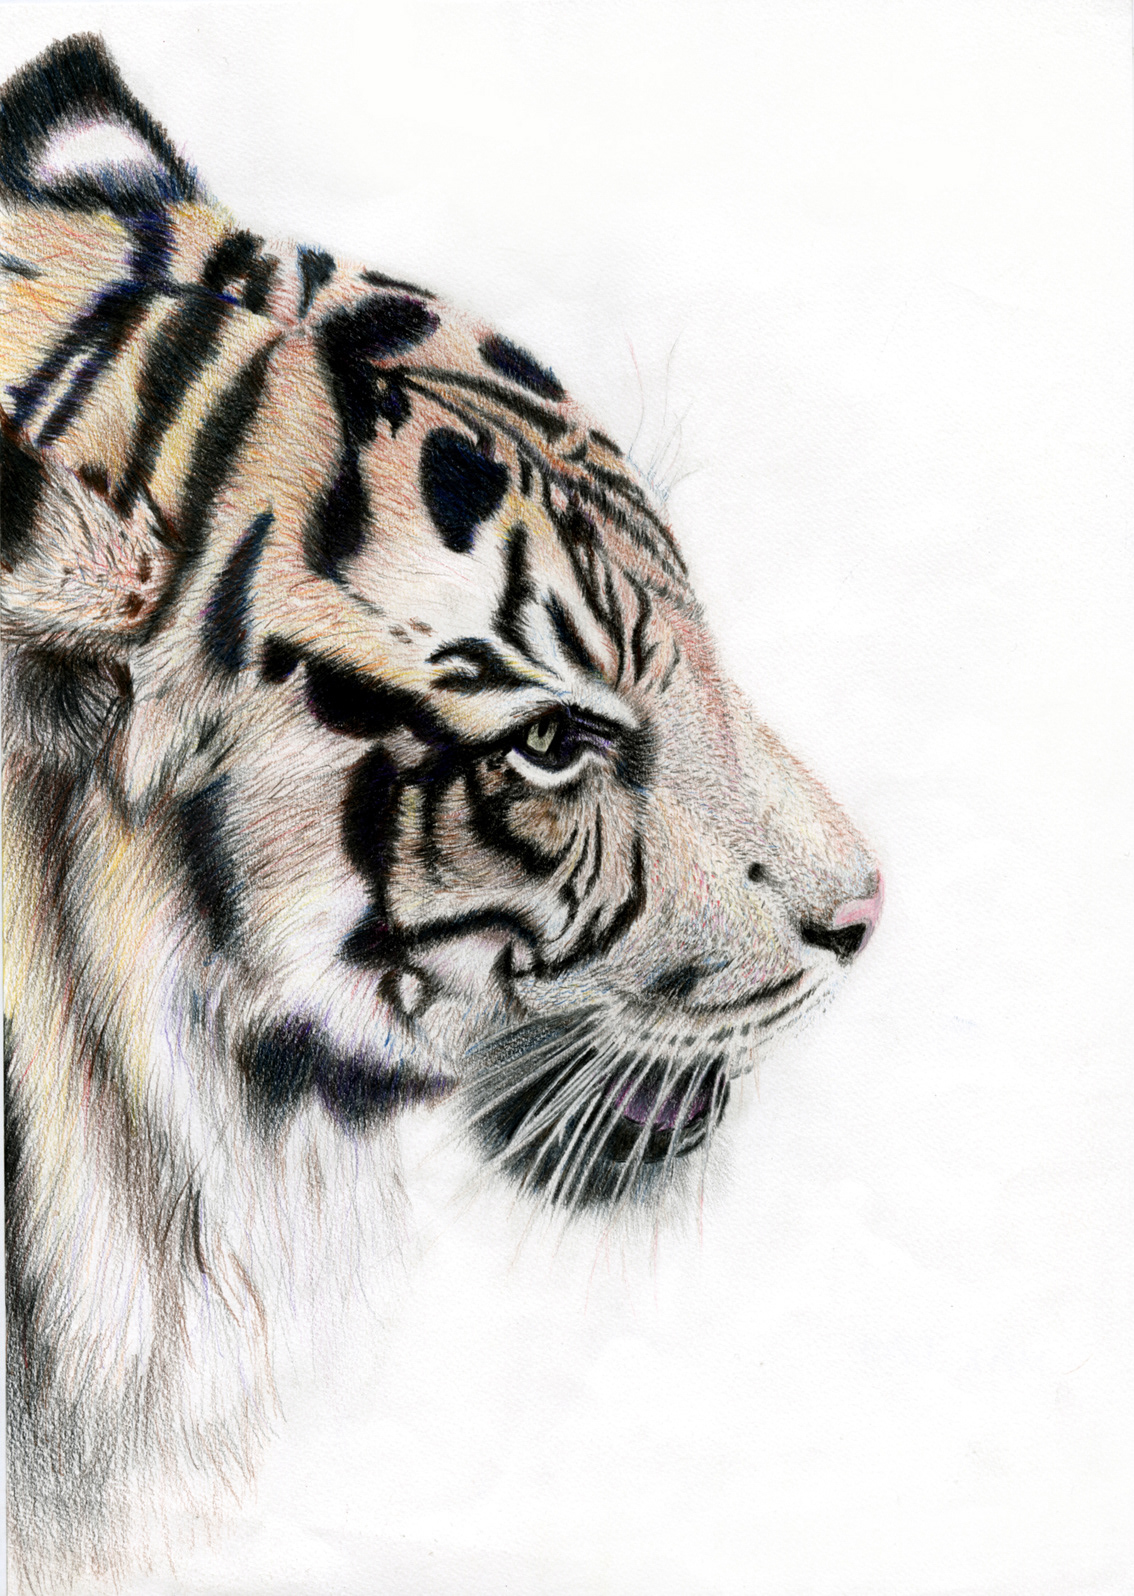 tiger color pencil zoo live skill manipulation creative water